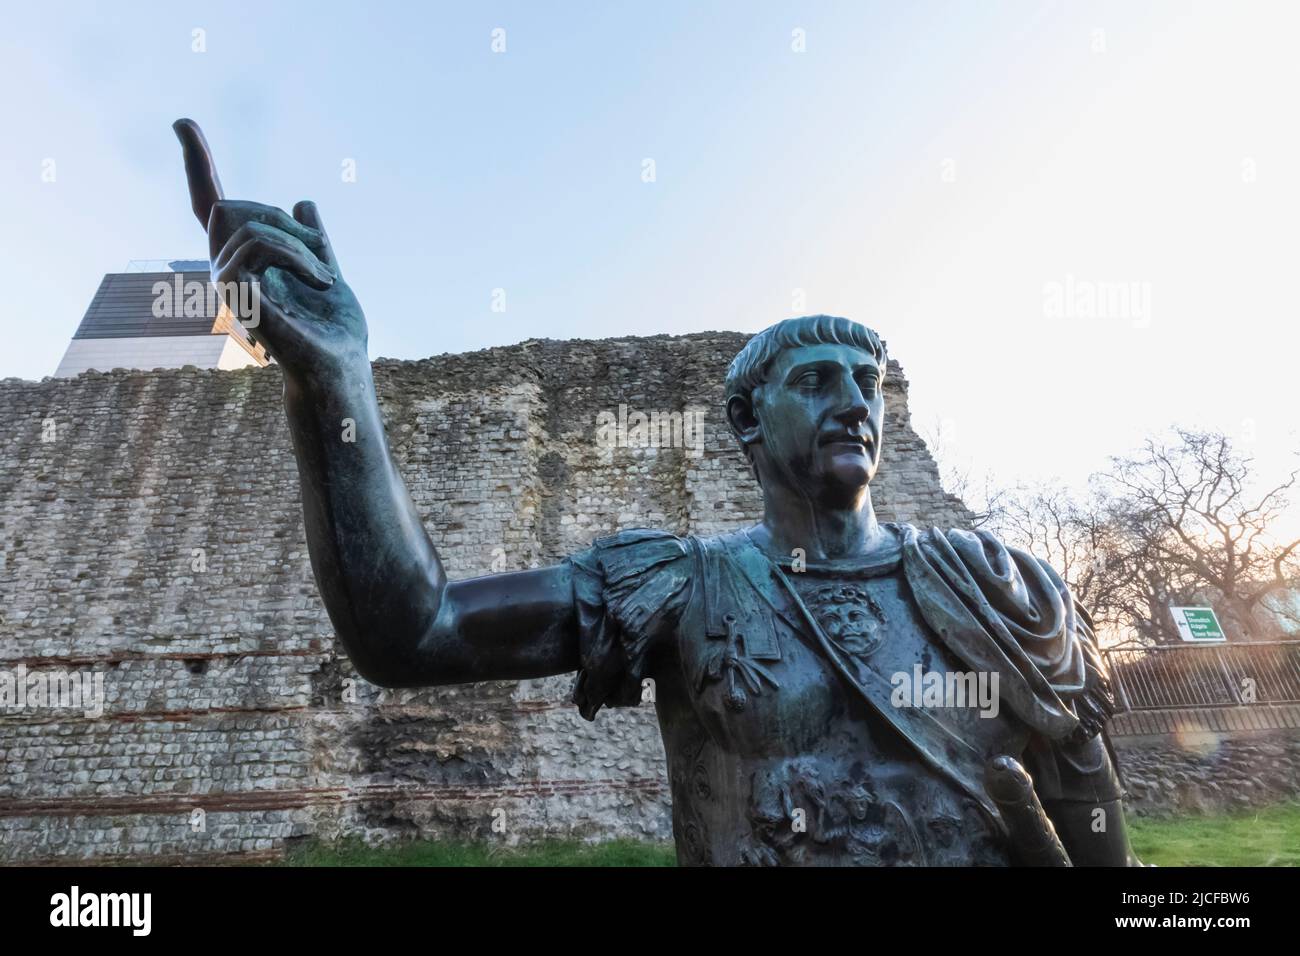 England, London, Tower Hill, Bronze Statue of the Roman Emperor Trajan and London Wall Stock Photo